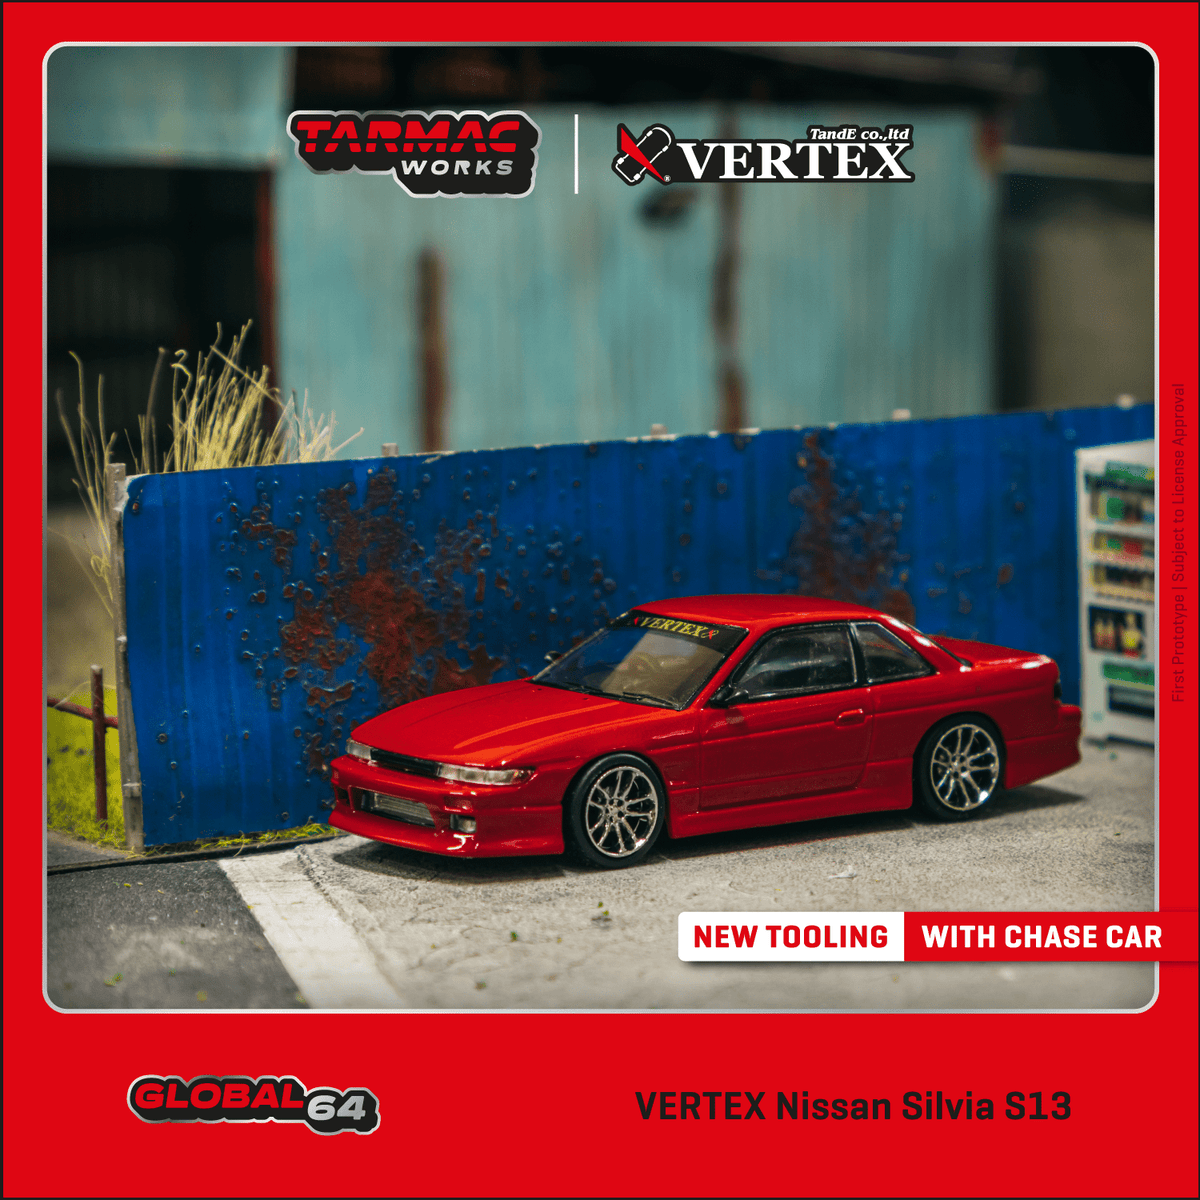 PREORDER TARMAC WORKS GLOBAL64 1/64 VERTEX Nissan Silvia S13 Red Metallic  T64G-025-RE (Approx. Release Date : JAN 2024 subject to manufacturer's  final 